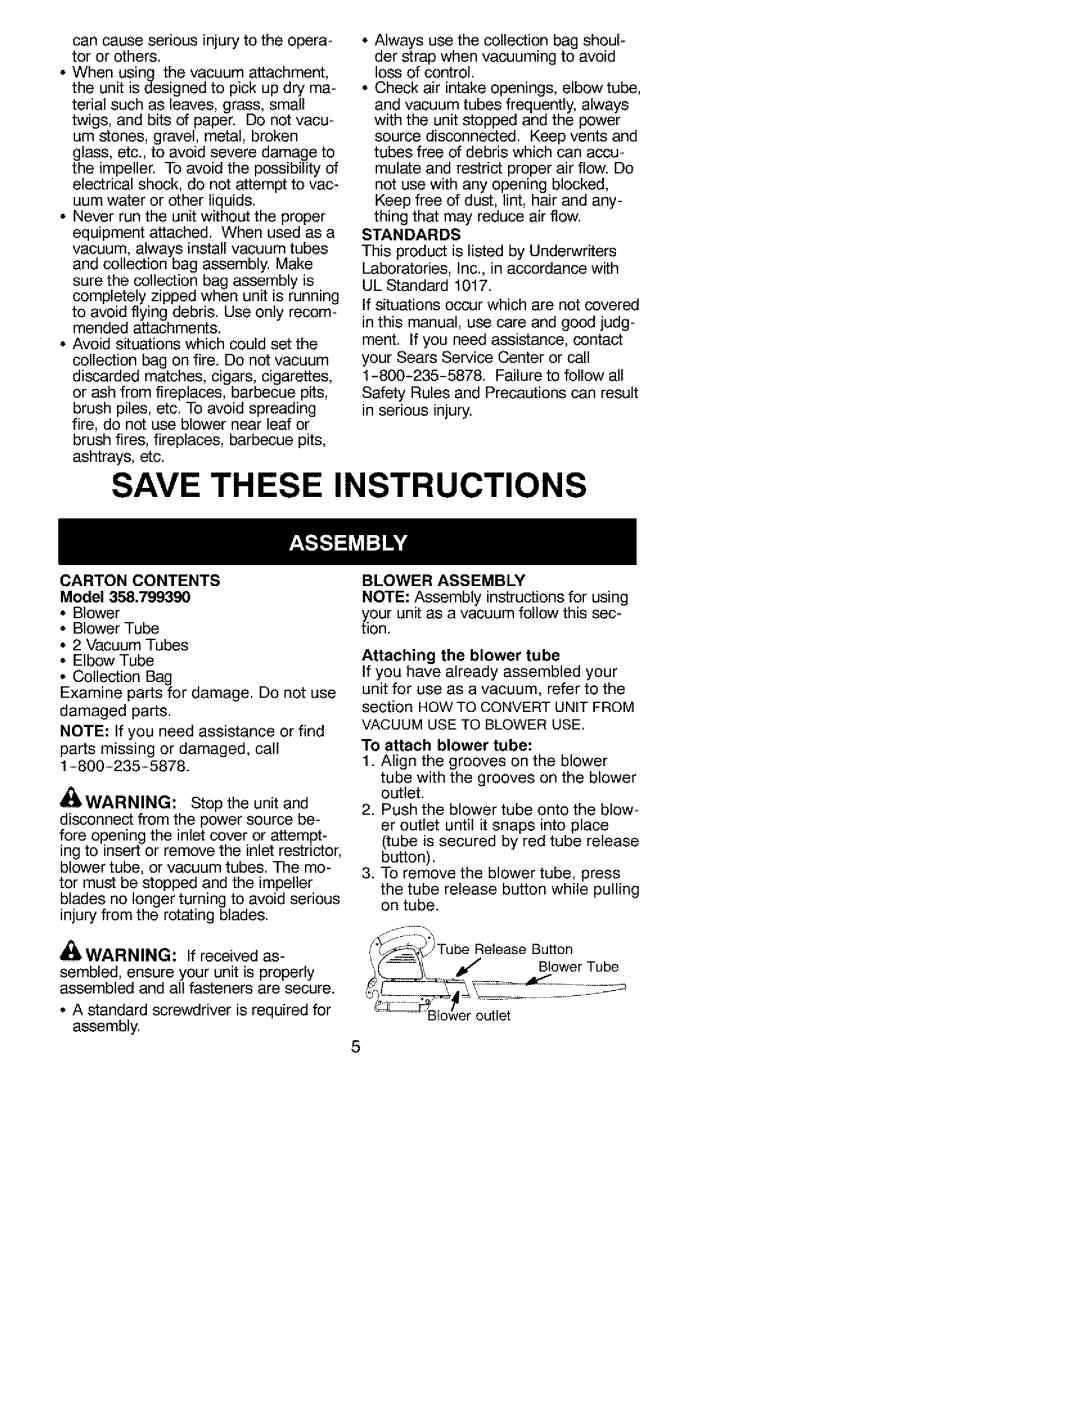 Craftsman 79939 manual Save These Instructions 